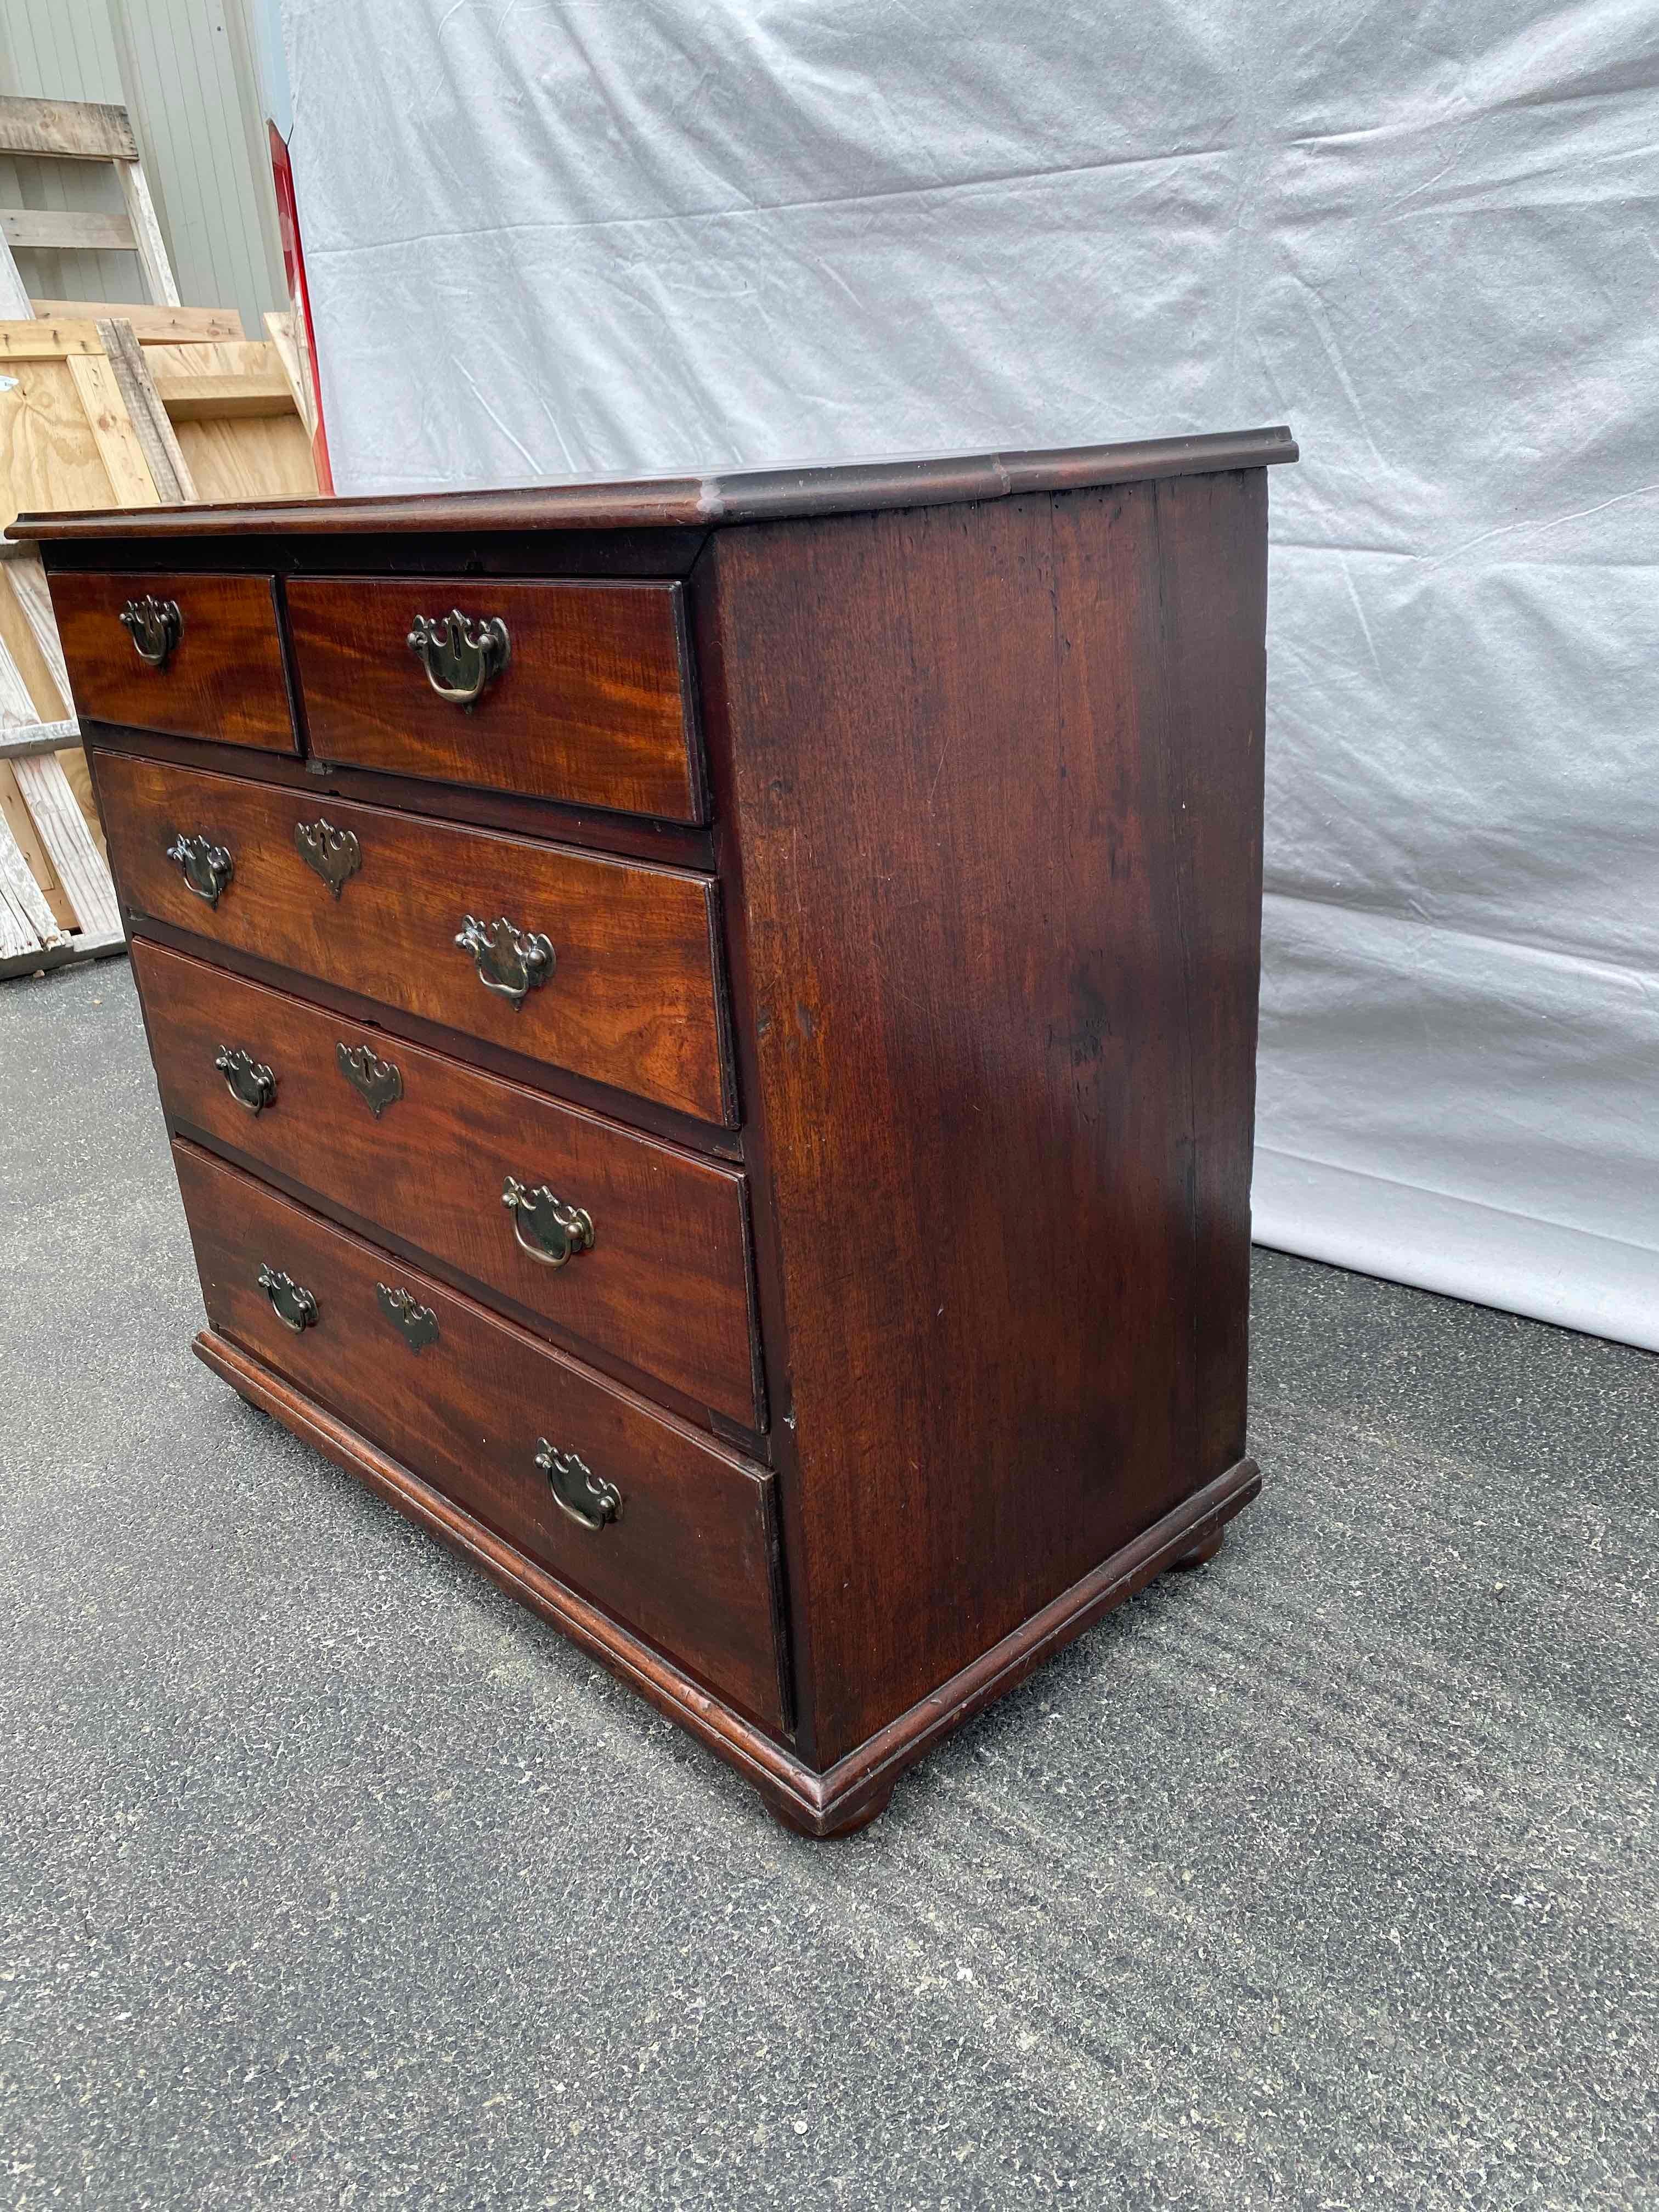 19th century Mahogany chest of drawers with molded top above 2 over 3 drawer configuration, all featuring brass batwing hardware. Overall lovely, mellow patina.